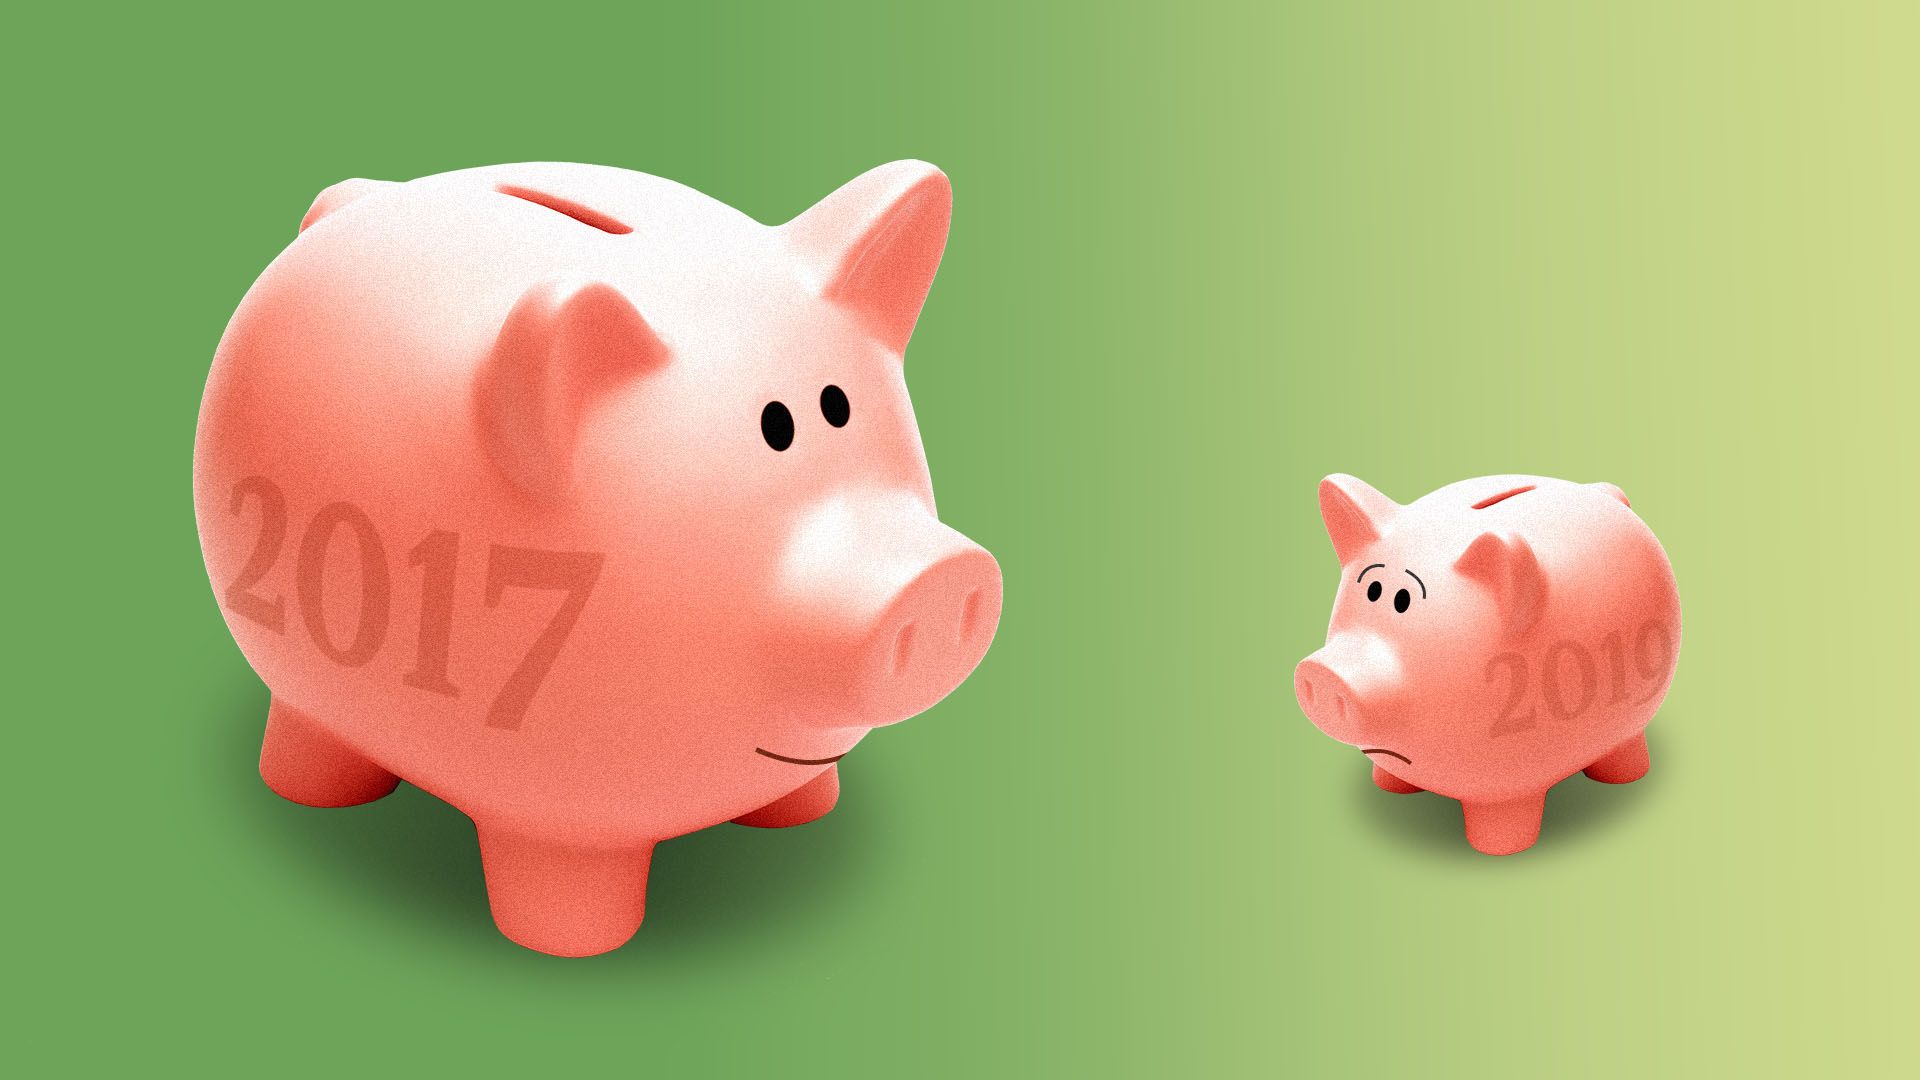 Illustration of a big smiling piggy bank that says "2017" on the side, and a smaller, worried-looking piggy bank that reads "2019"